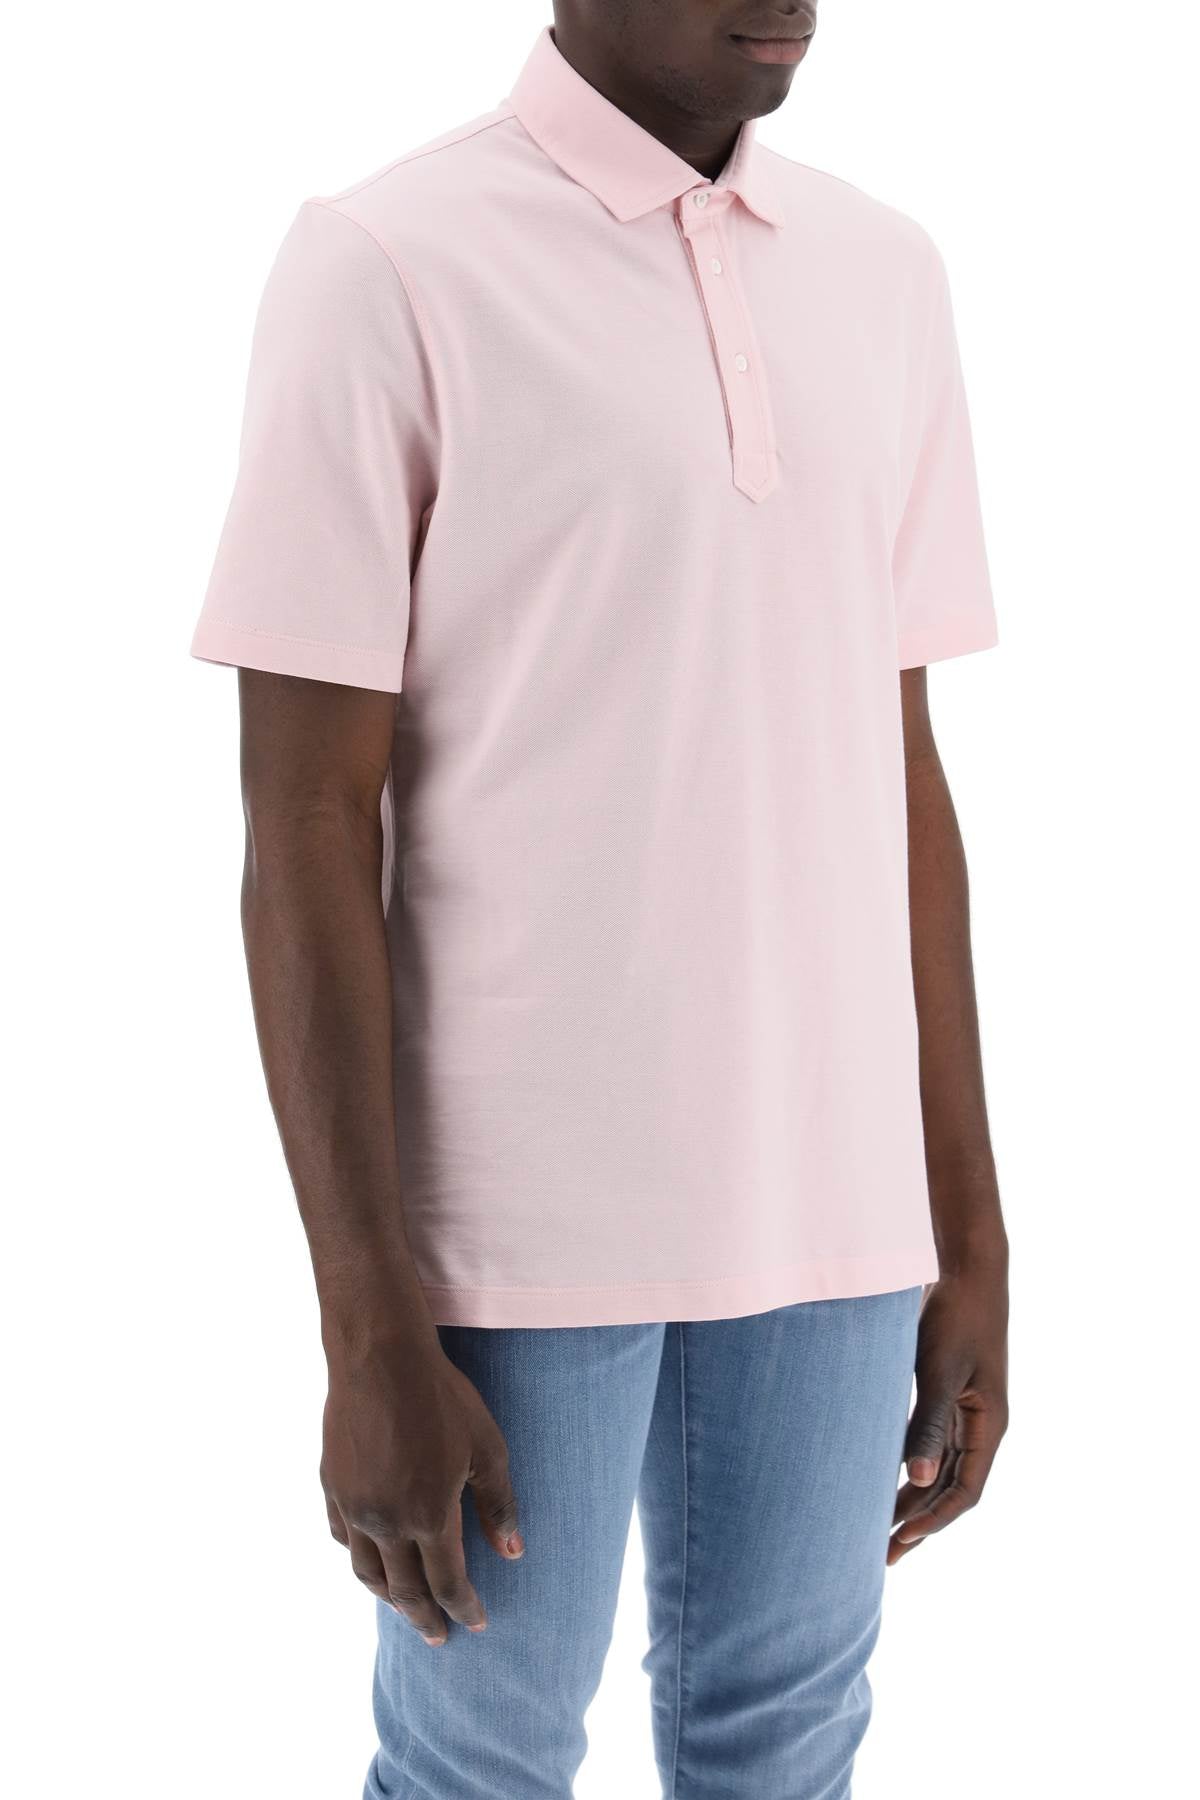 Brunello cucinelli polo shirt with french collar-men > clothing > t-shirts and sweatshirts > polos-Brunello Cucinelli-Urbanheer